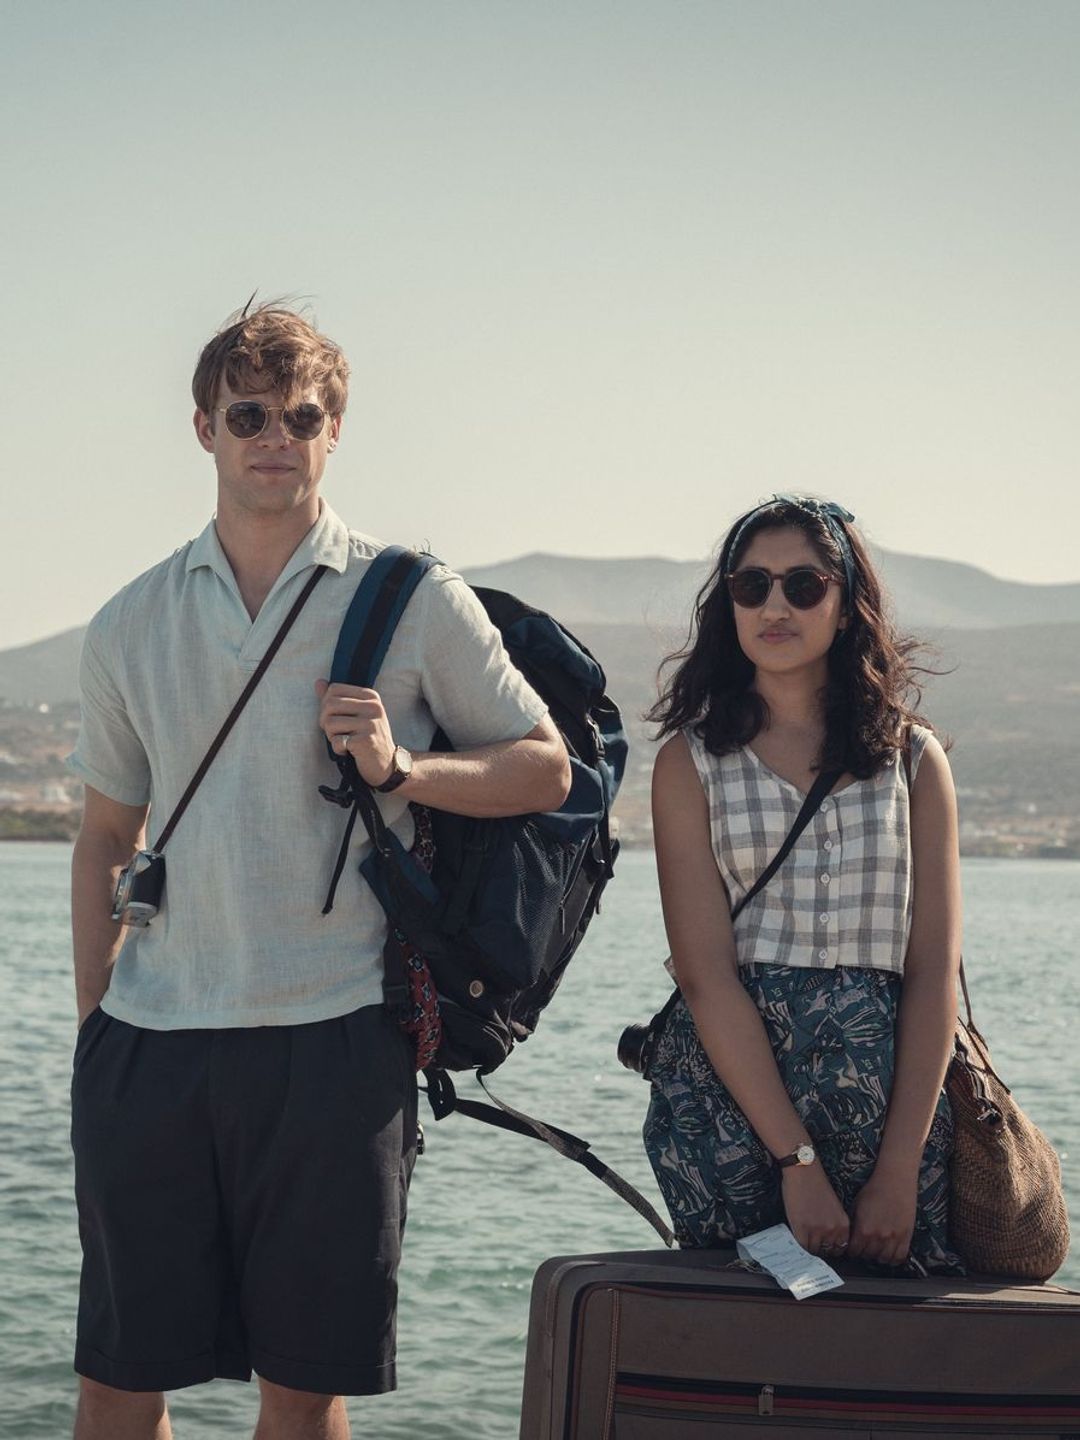 A still from Netflix's One Day Series shows actors, Leo Woodall and Ambika Mod with luggage infront of an ocean backdrop